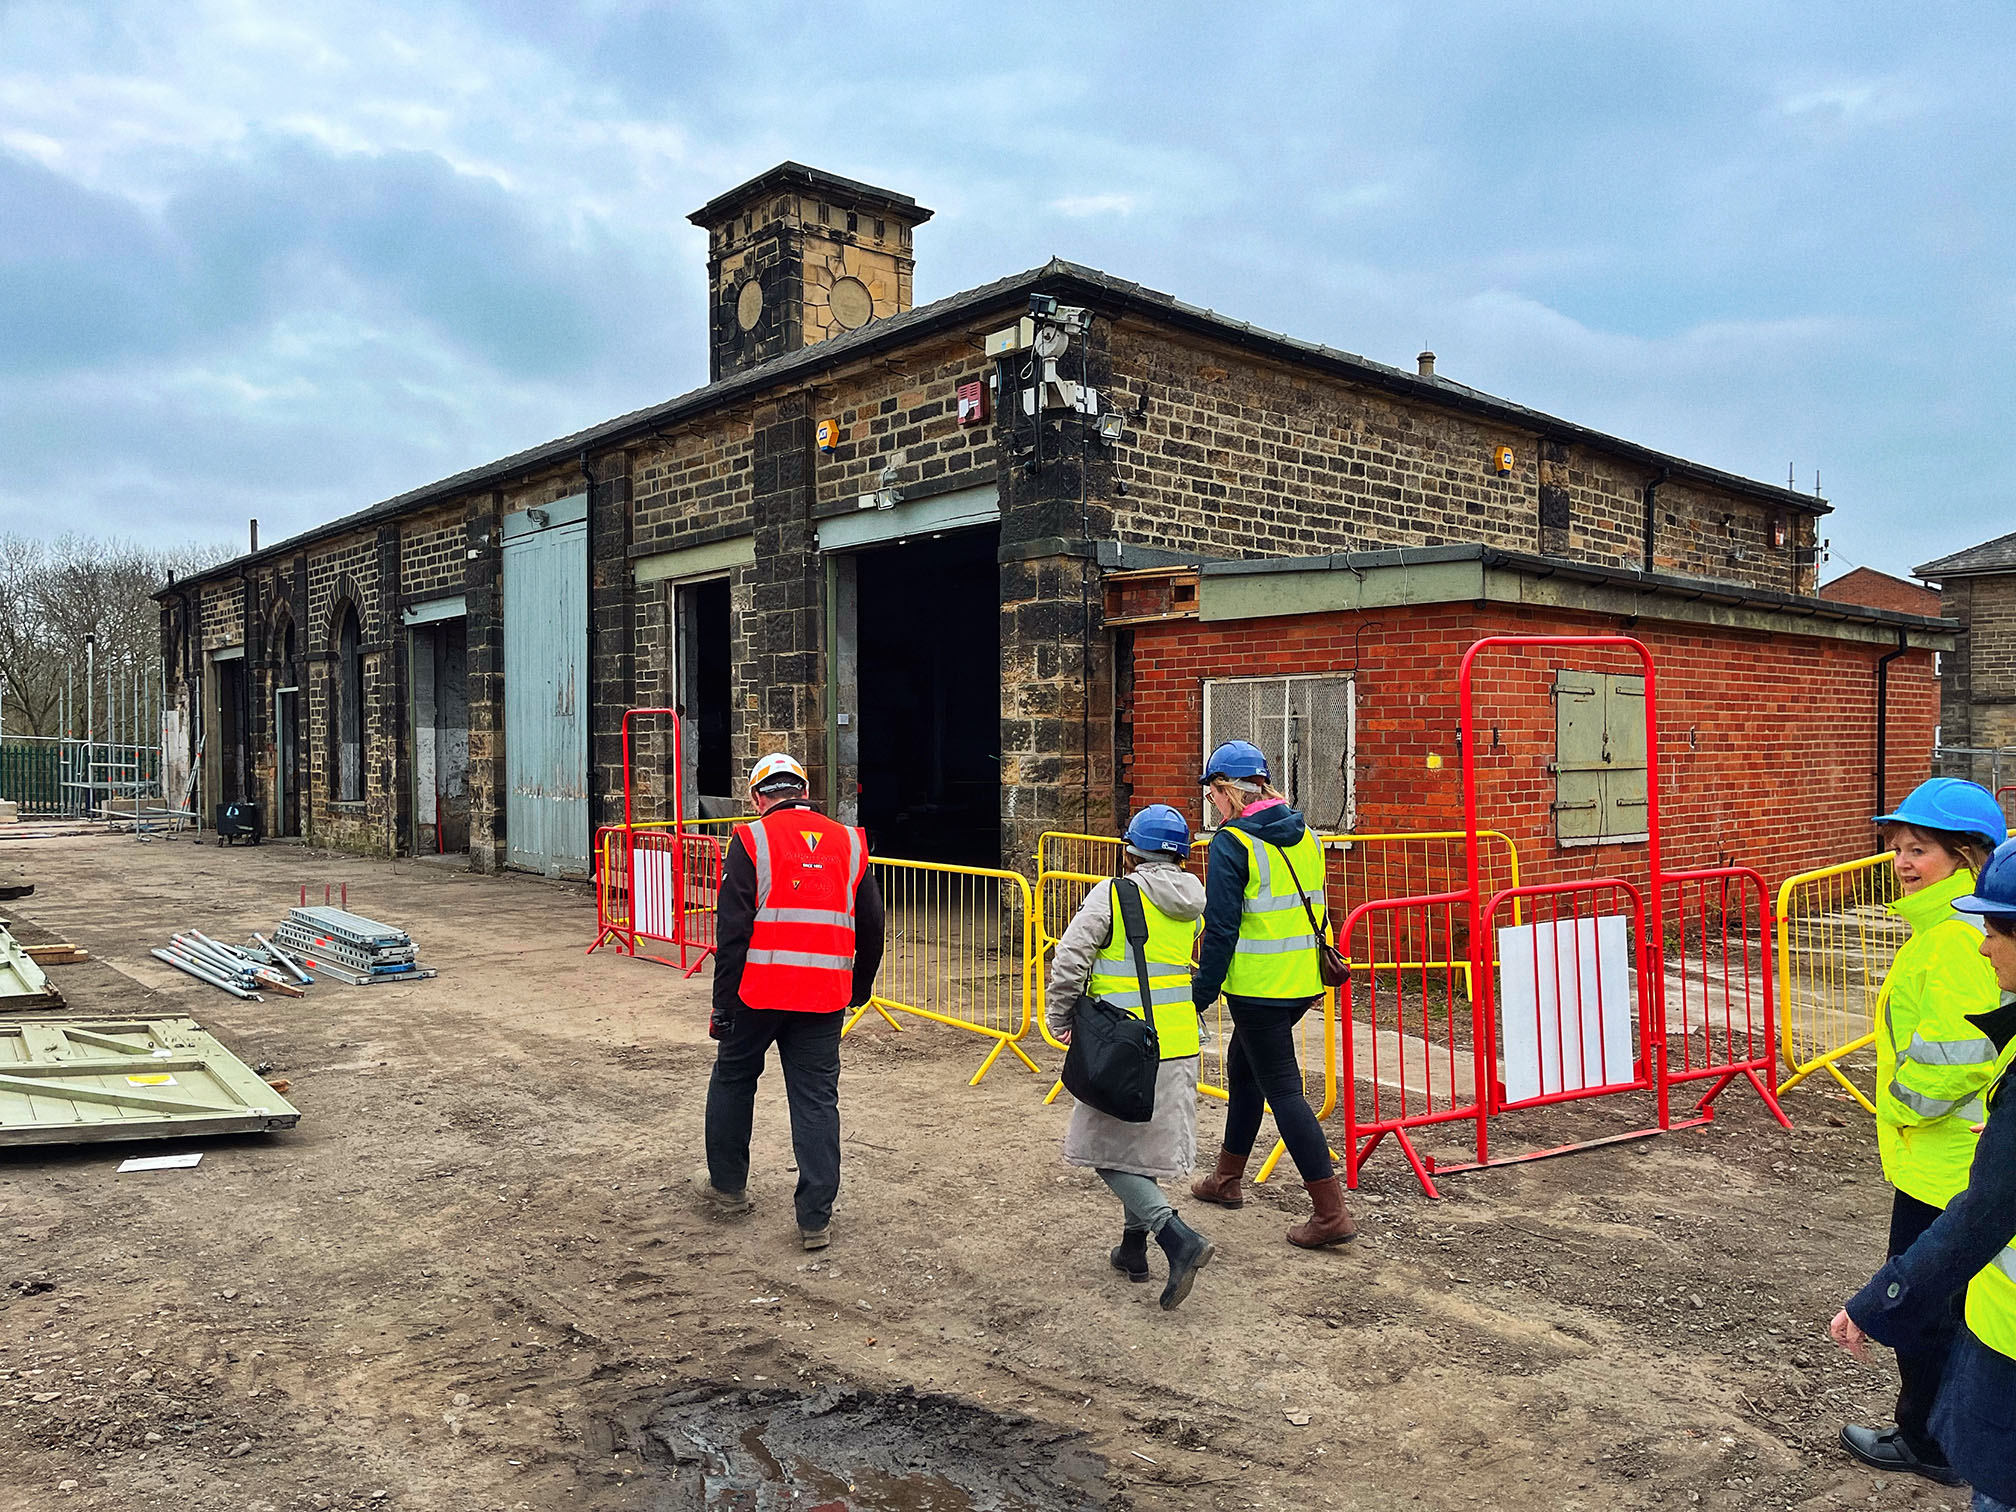 A derelict one-storey brick building with people in high vis jackets in the foreground. 